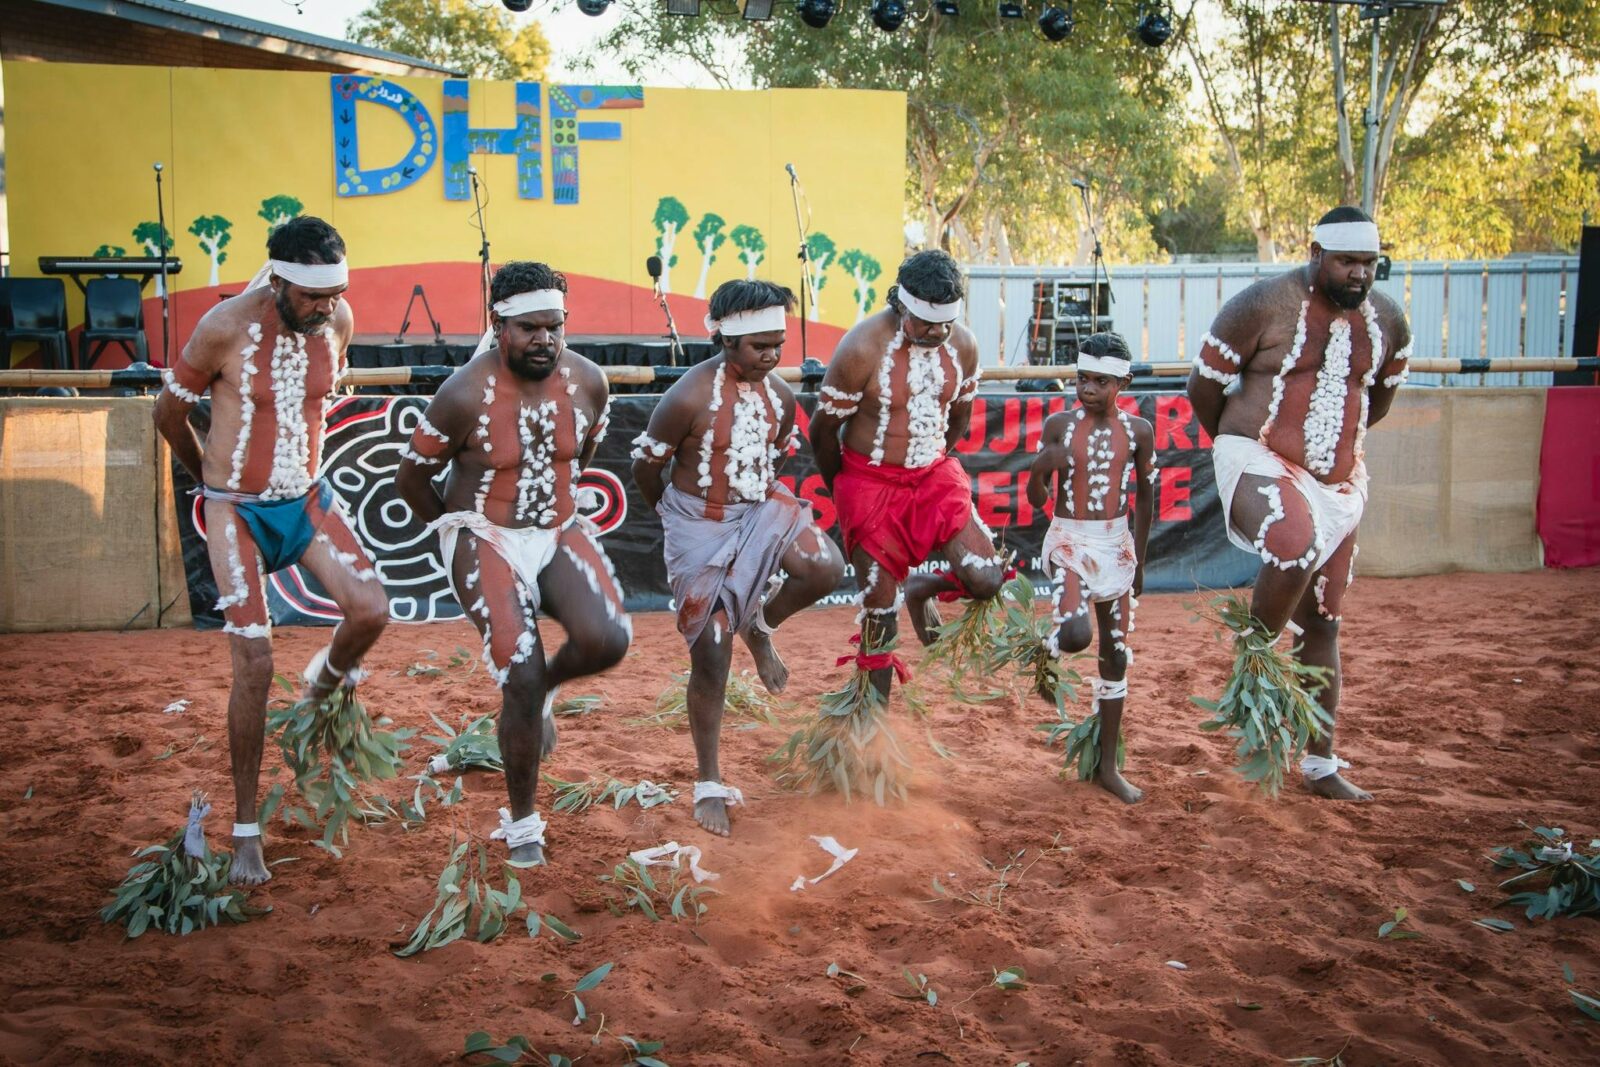 5 Indigenous men & 1 child dressed in traditional clothing & body paint dance in front of a stage.